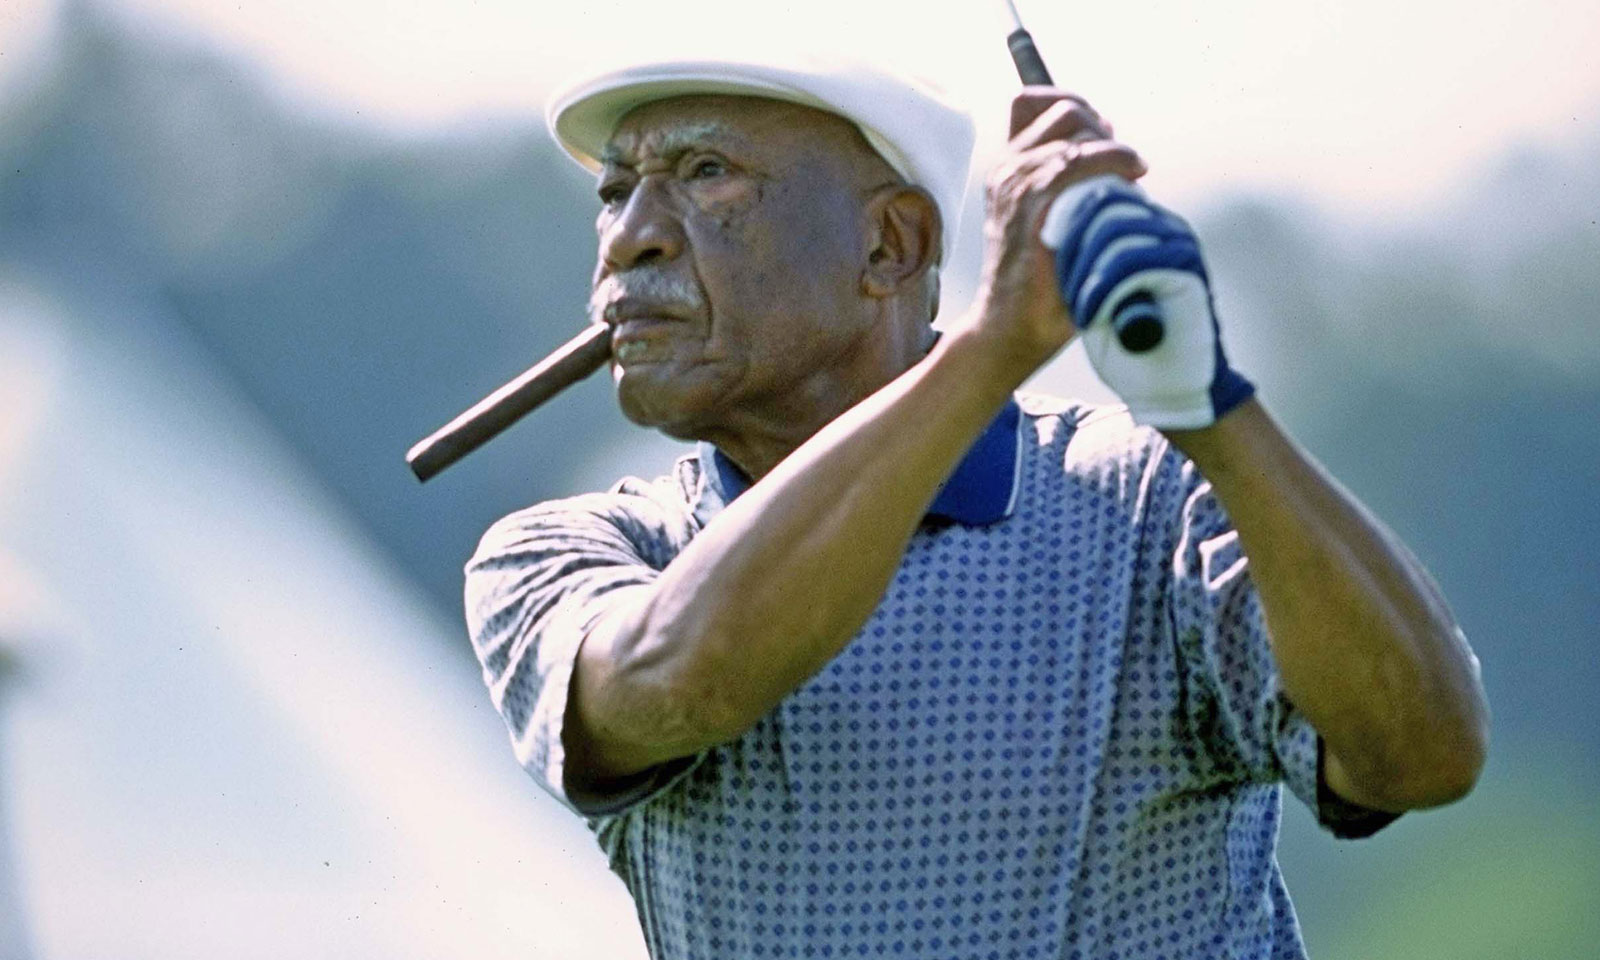 World Golf Hall of Fame Announces the Creation of the Charlie Sifford Award